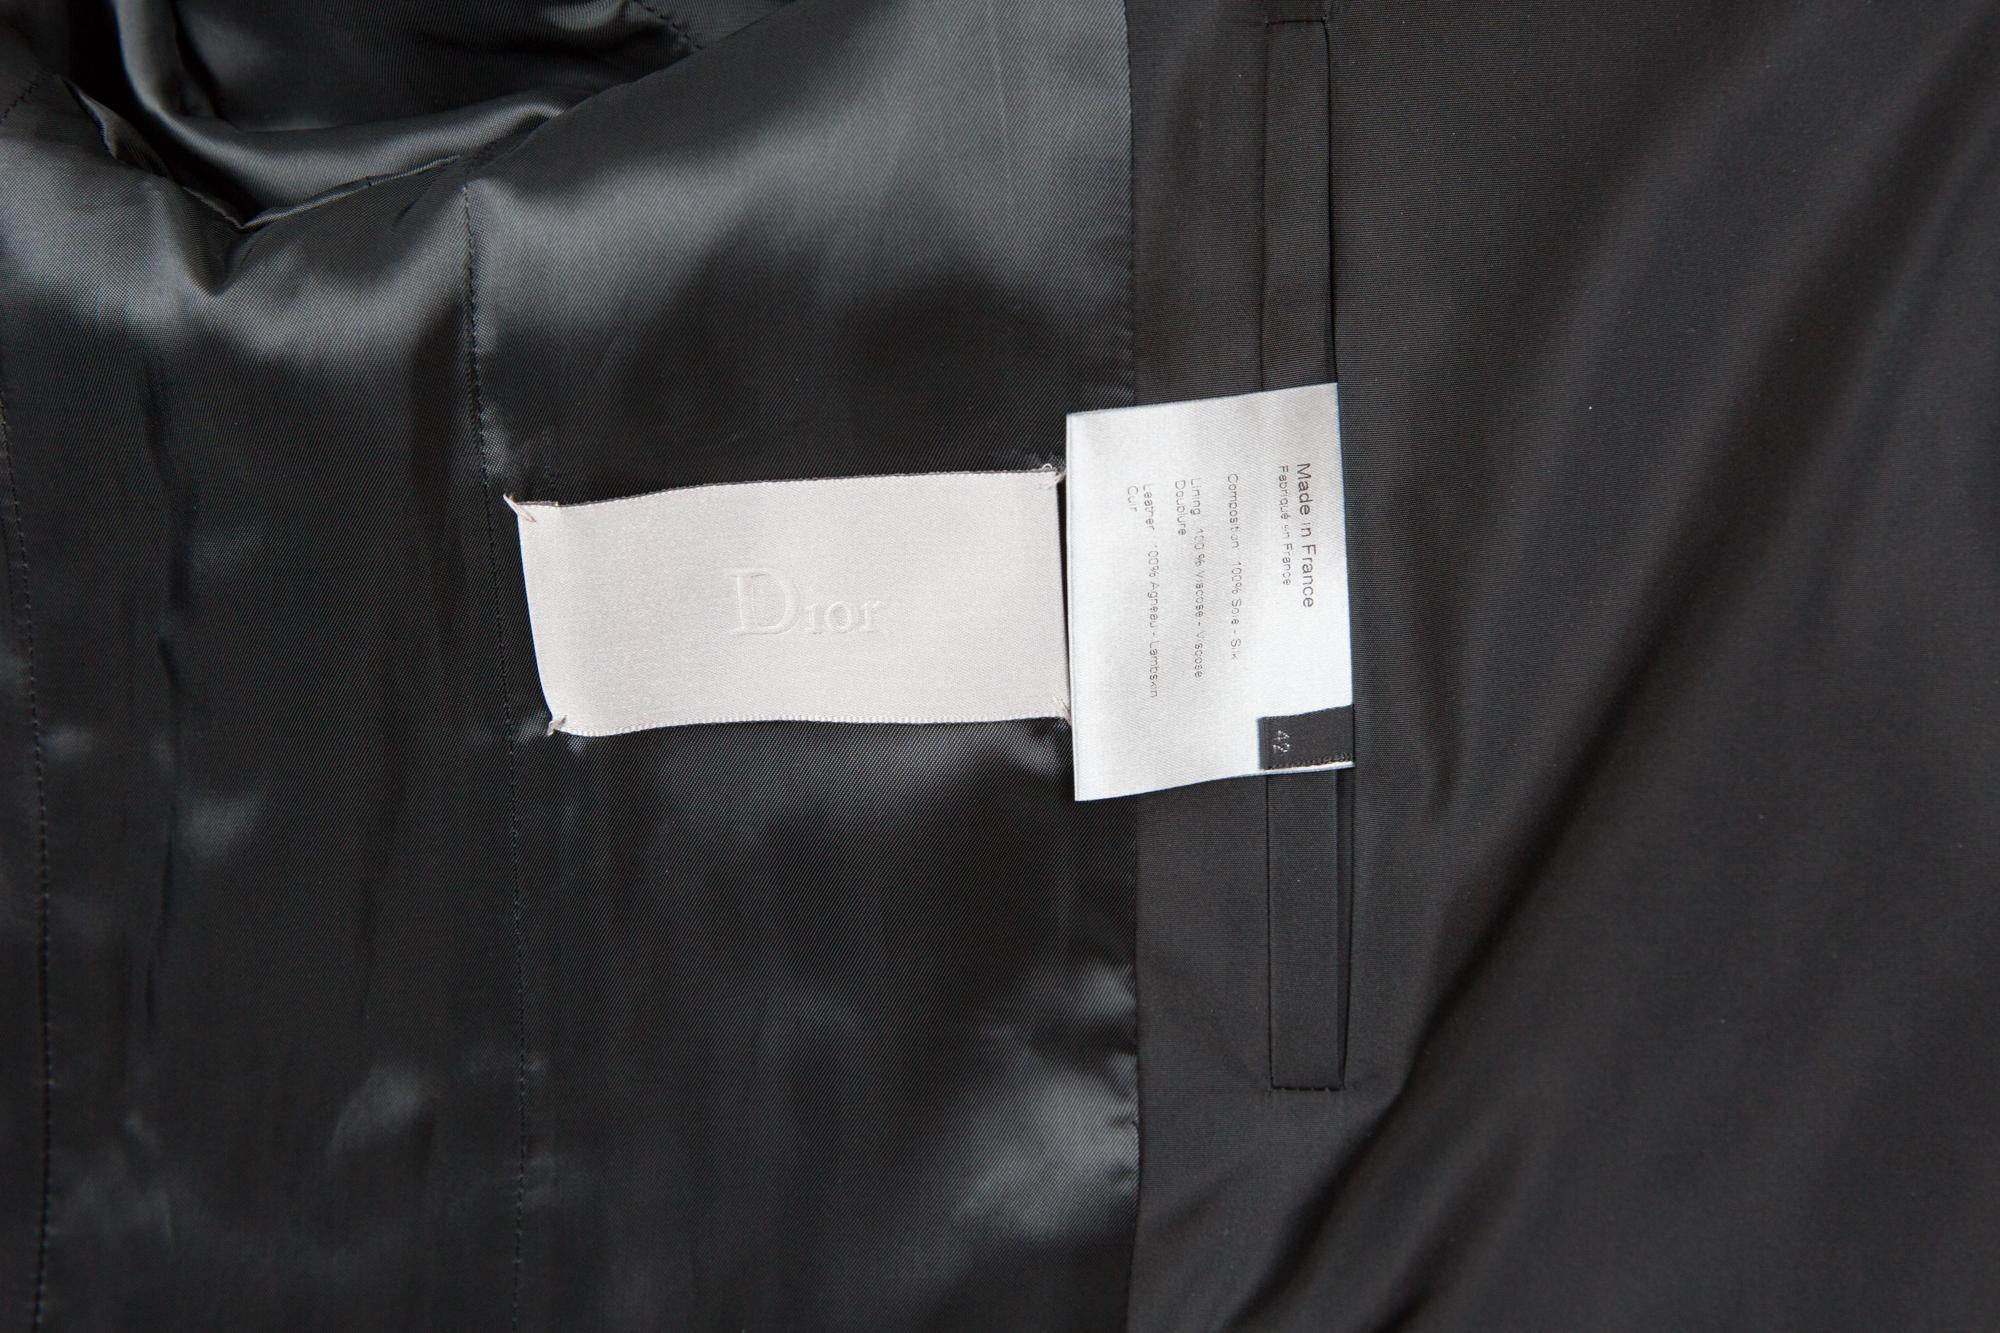 Hedi Slimane for Christian Dior Homme black silk Trench Coat featuring  black leather belt and shoulder free leather details, side pockets, double breasted with logo buttons.
It is from the Unisexe Collection
Composition:  100% Silk 
Circa